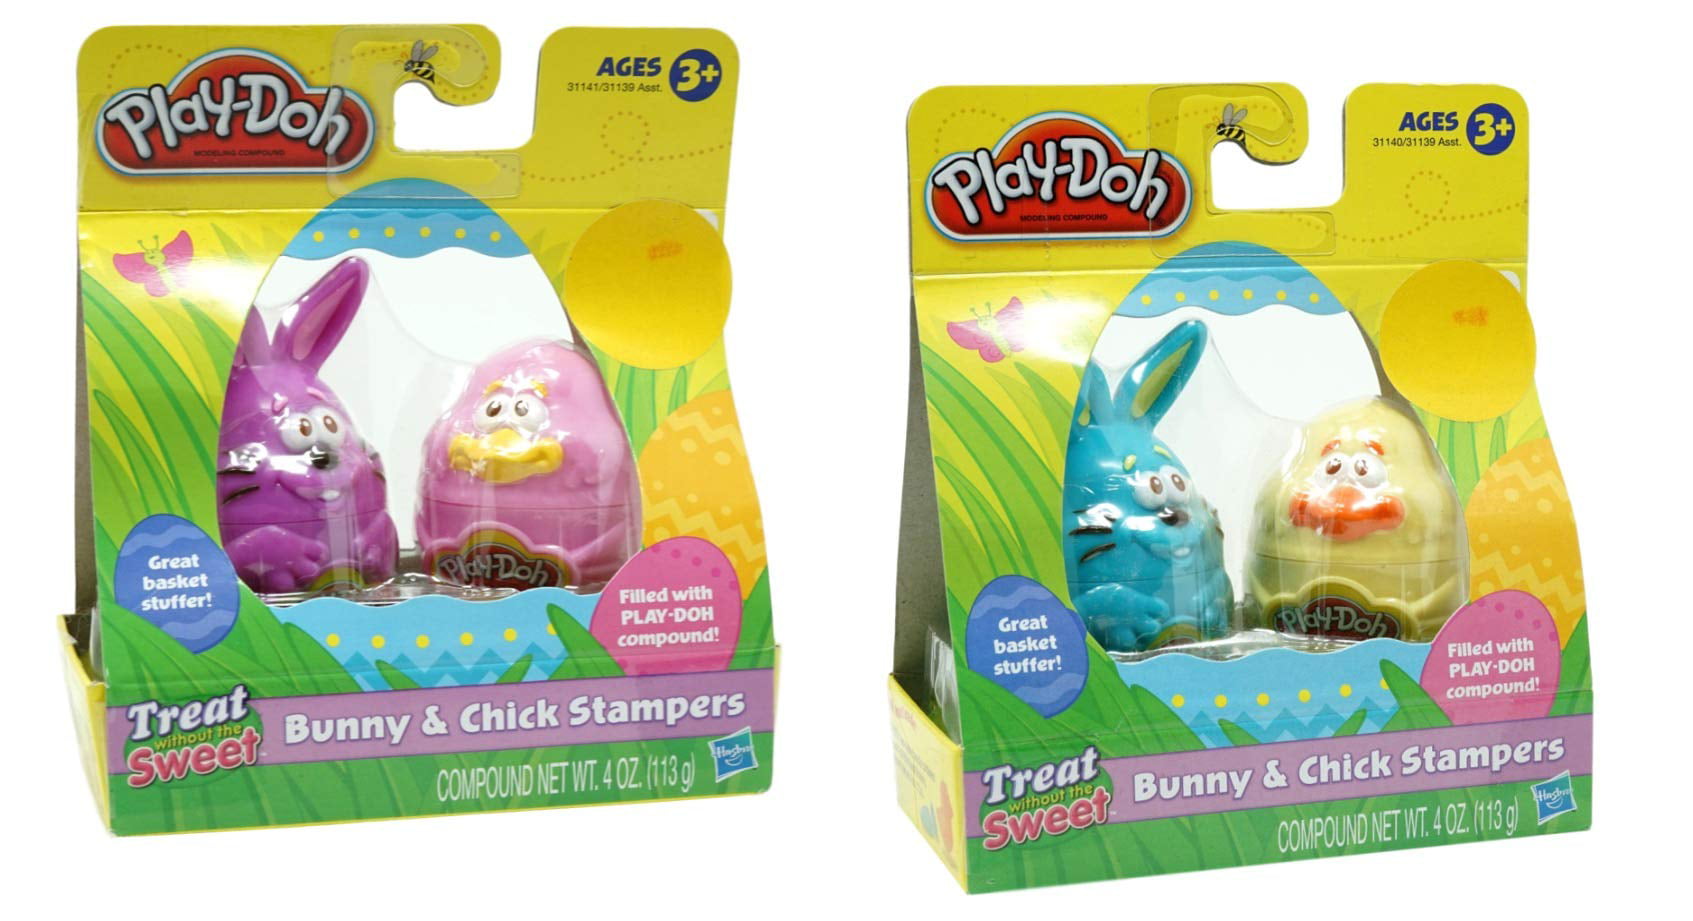 Details about   Hasbro Play-DOH Bunny and Chick STAMPERS Ages 3+ 